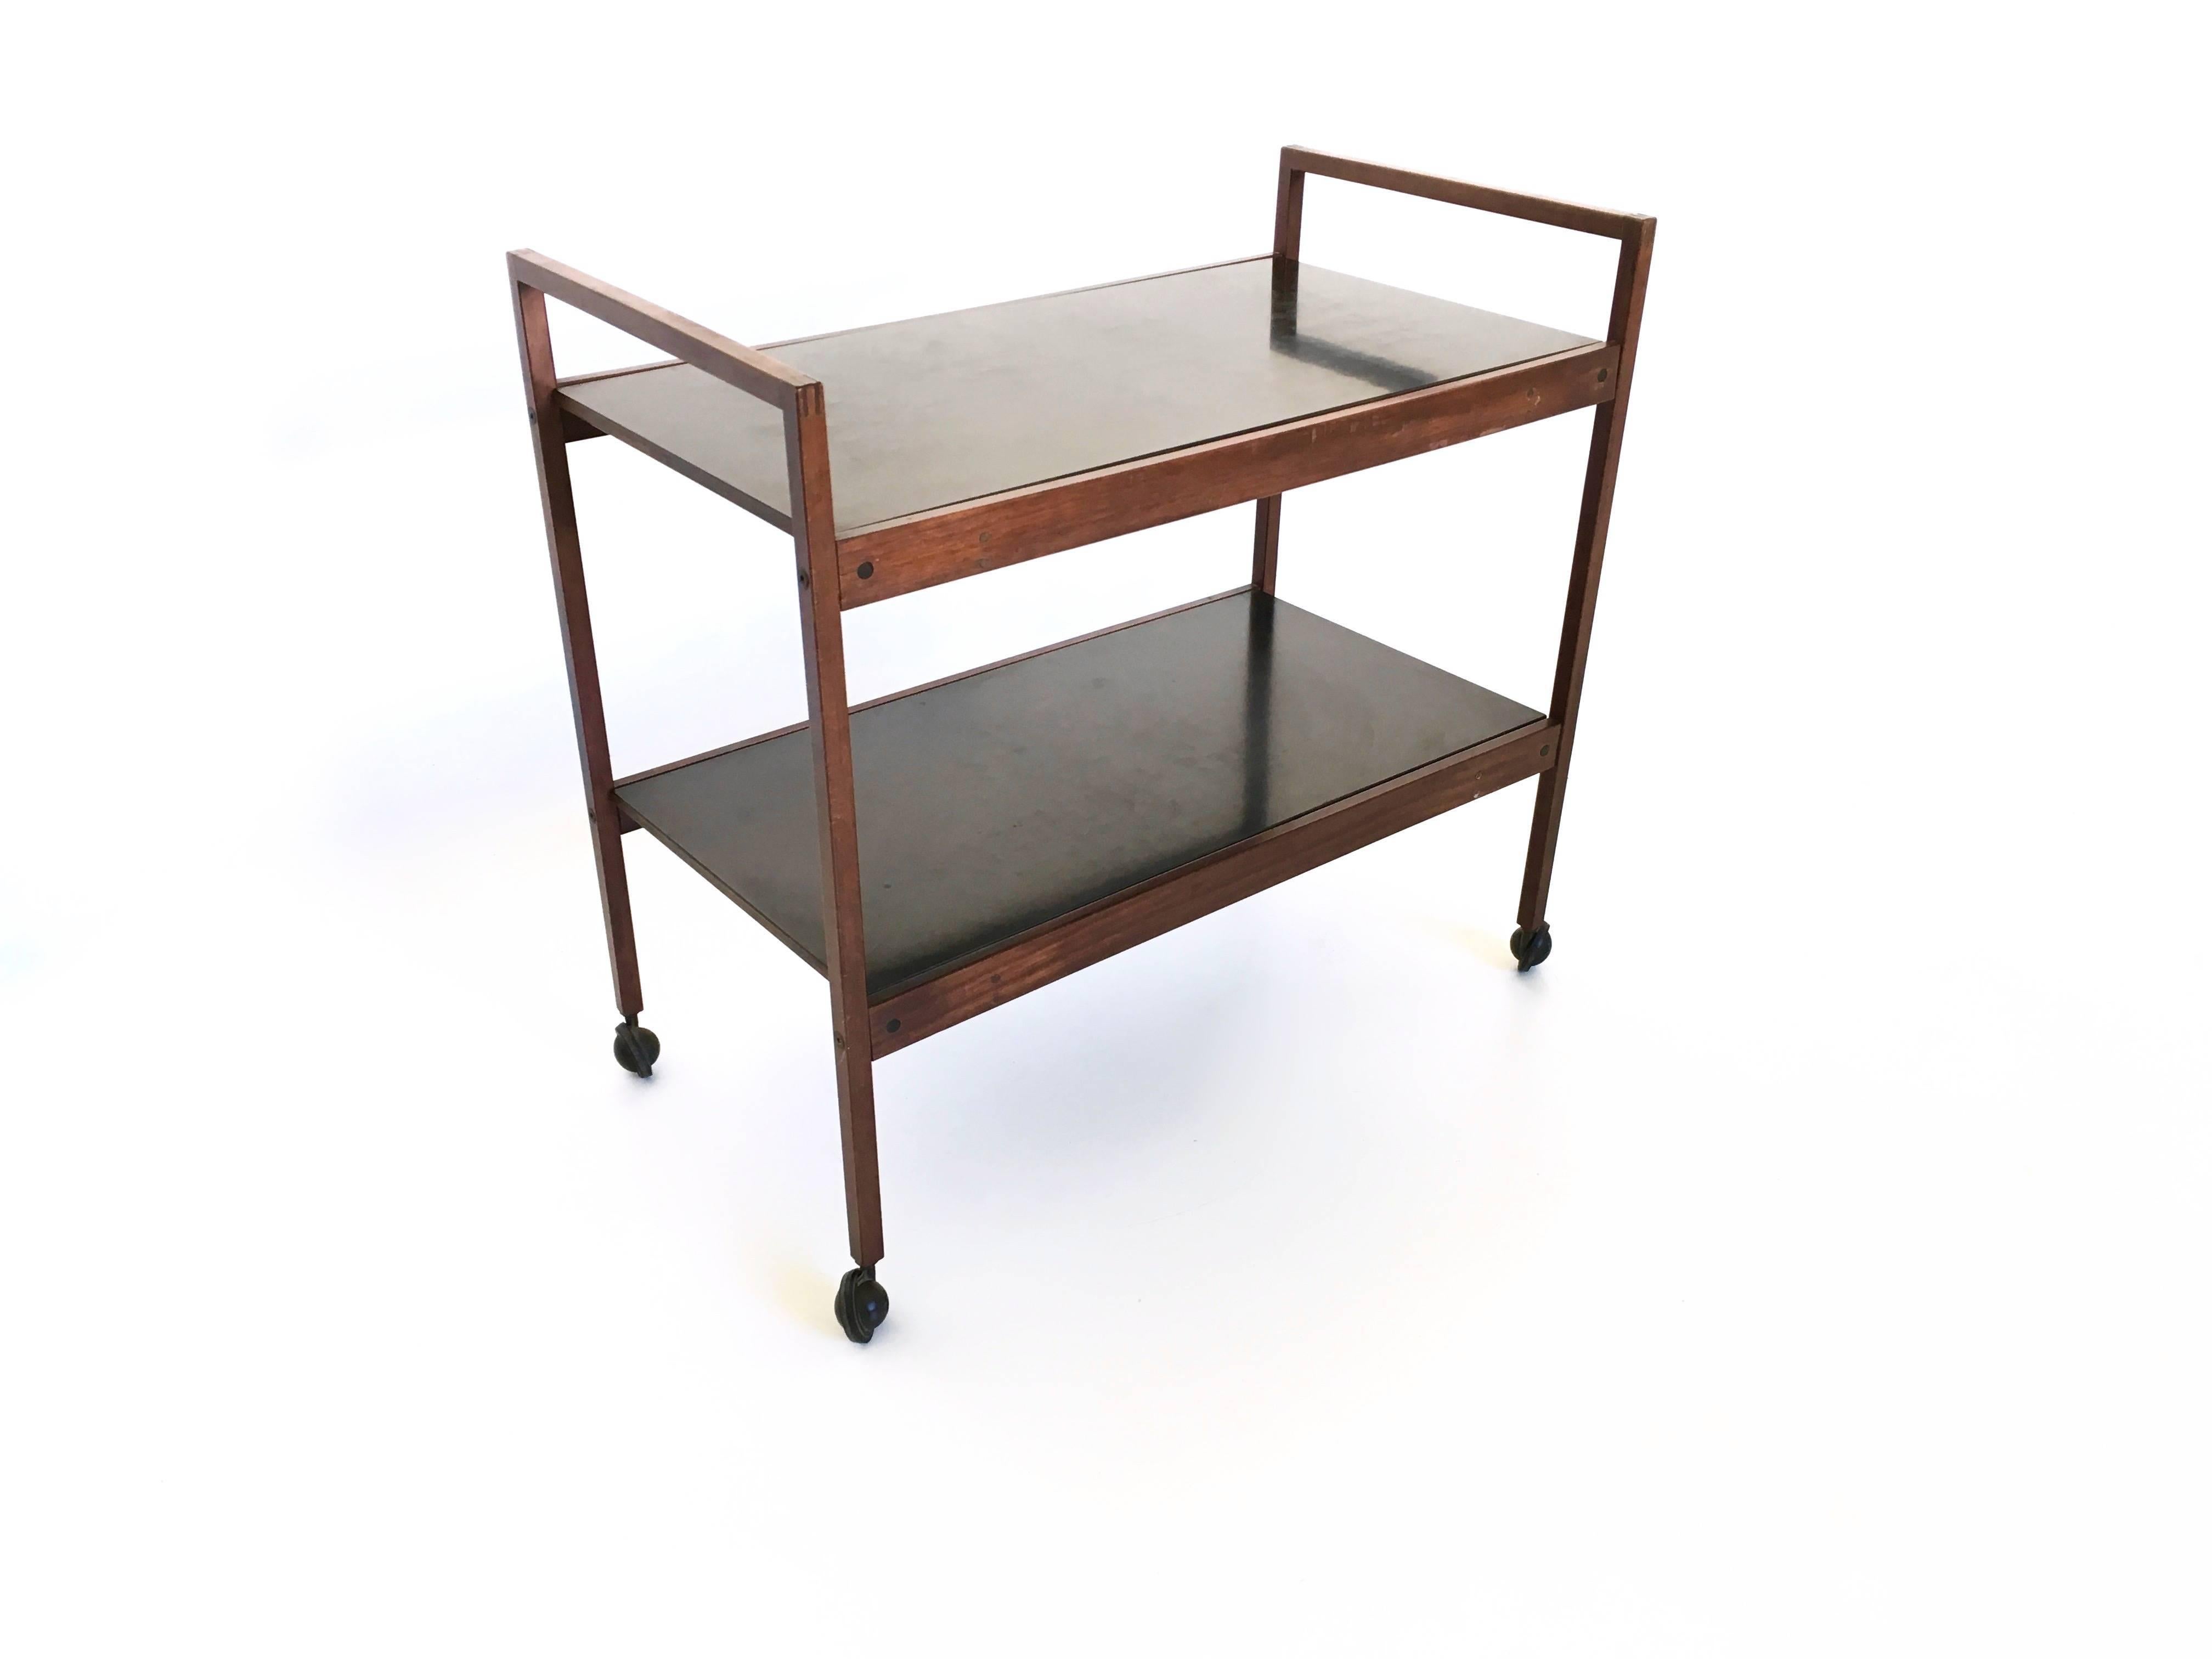 Serving cart made from mahogany and black formica.